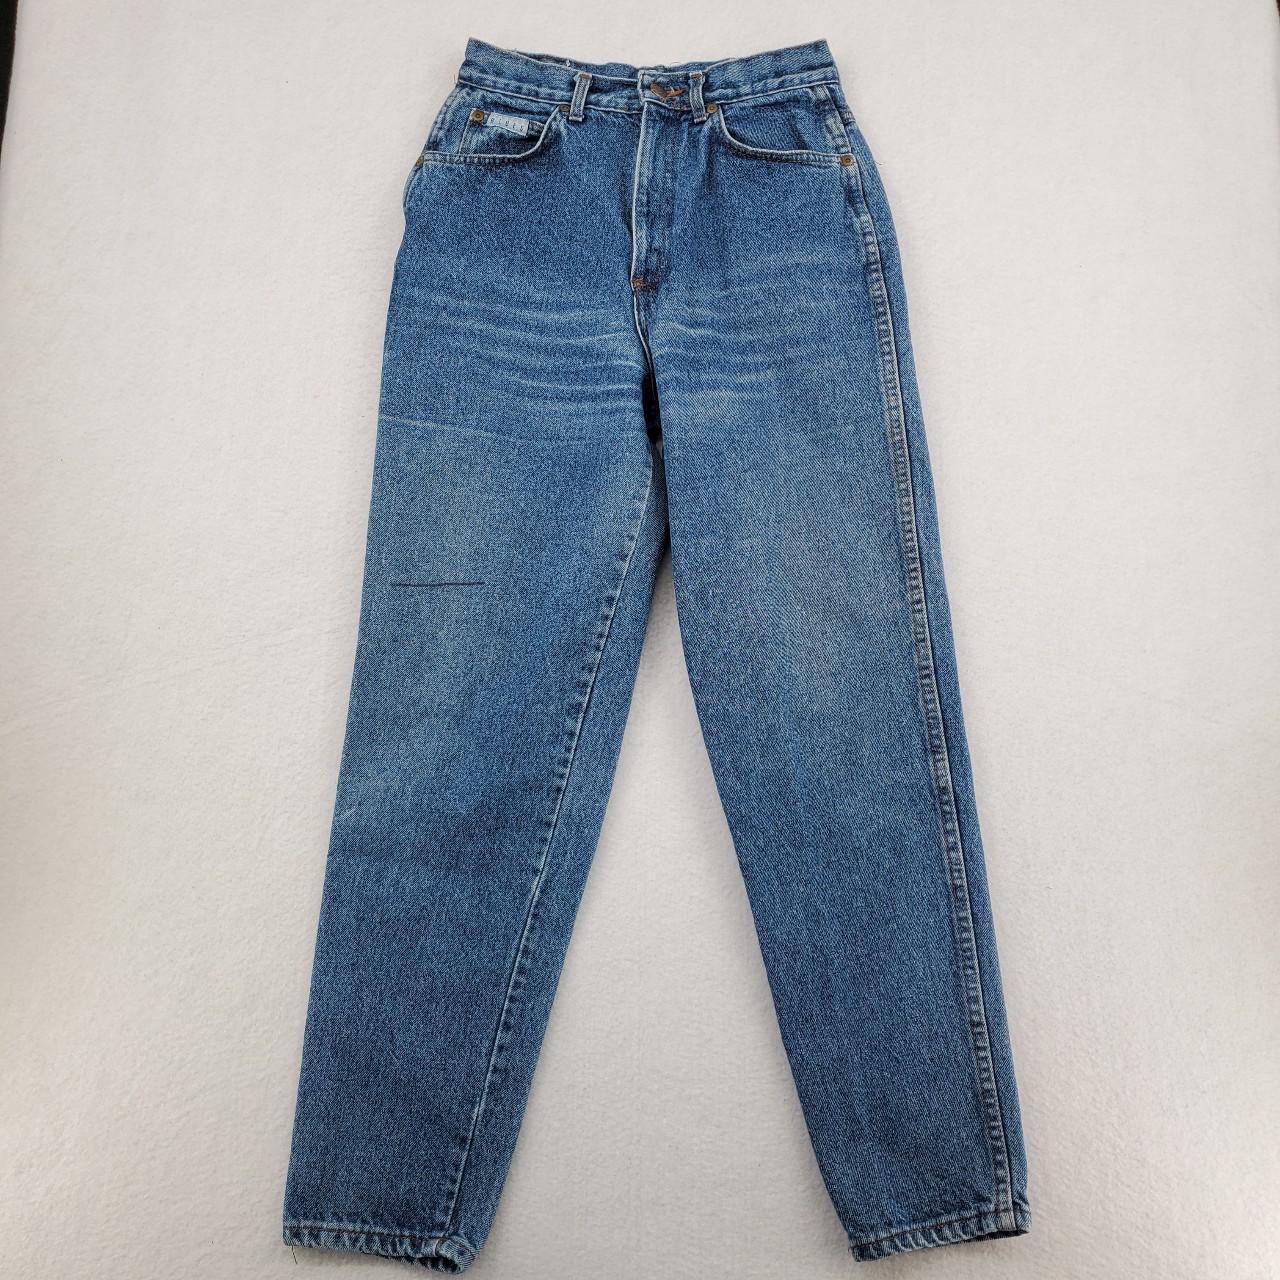 Sunset Blues High Waisted Tapered Jeans Vintage Made... - Depop